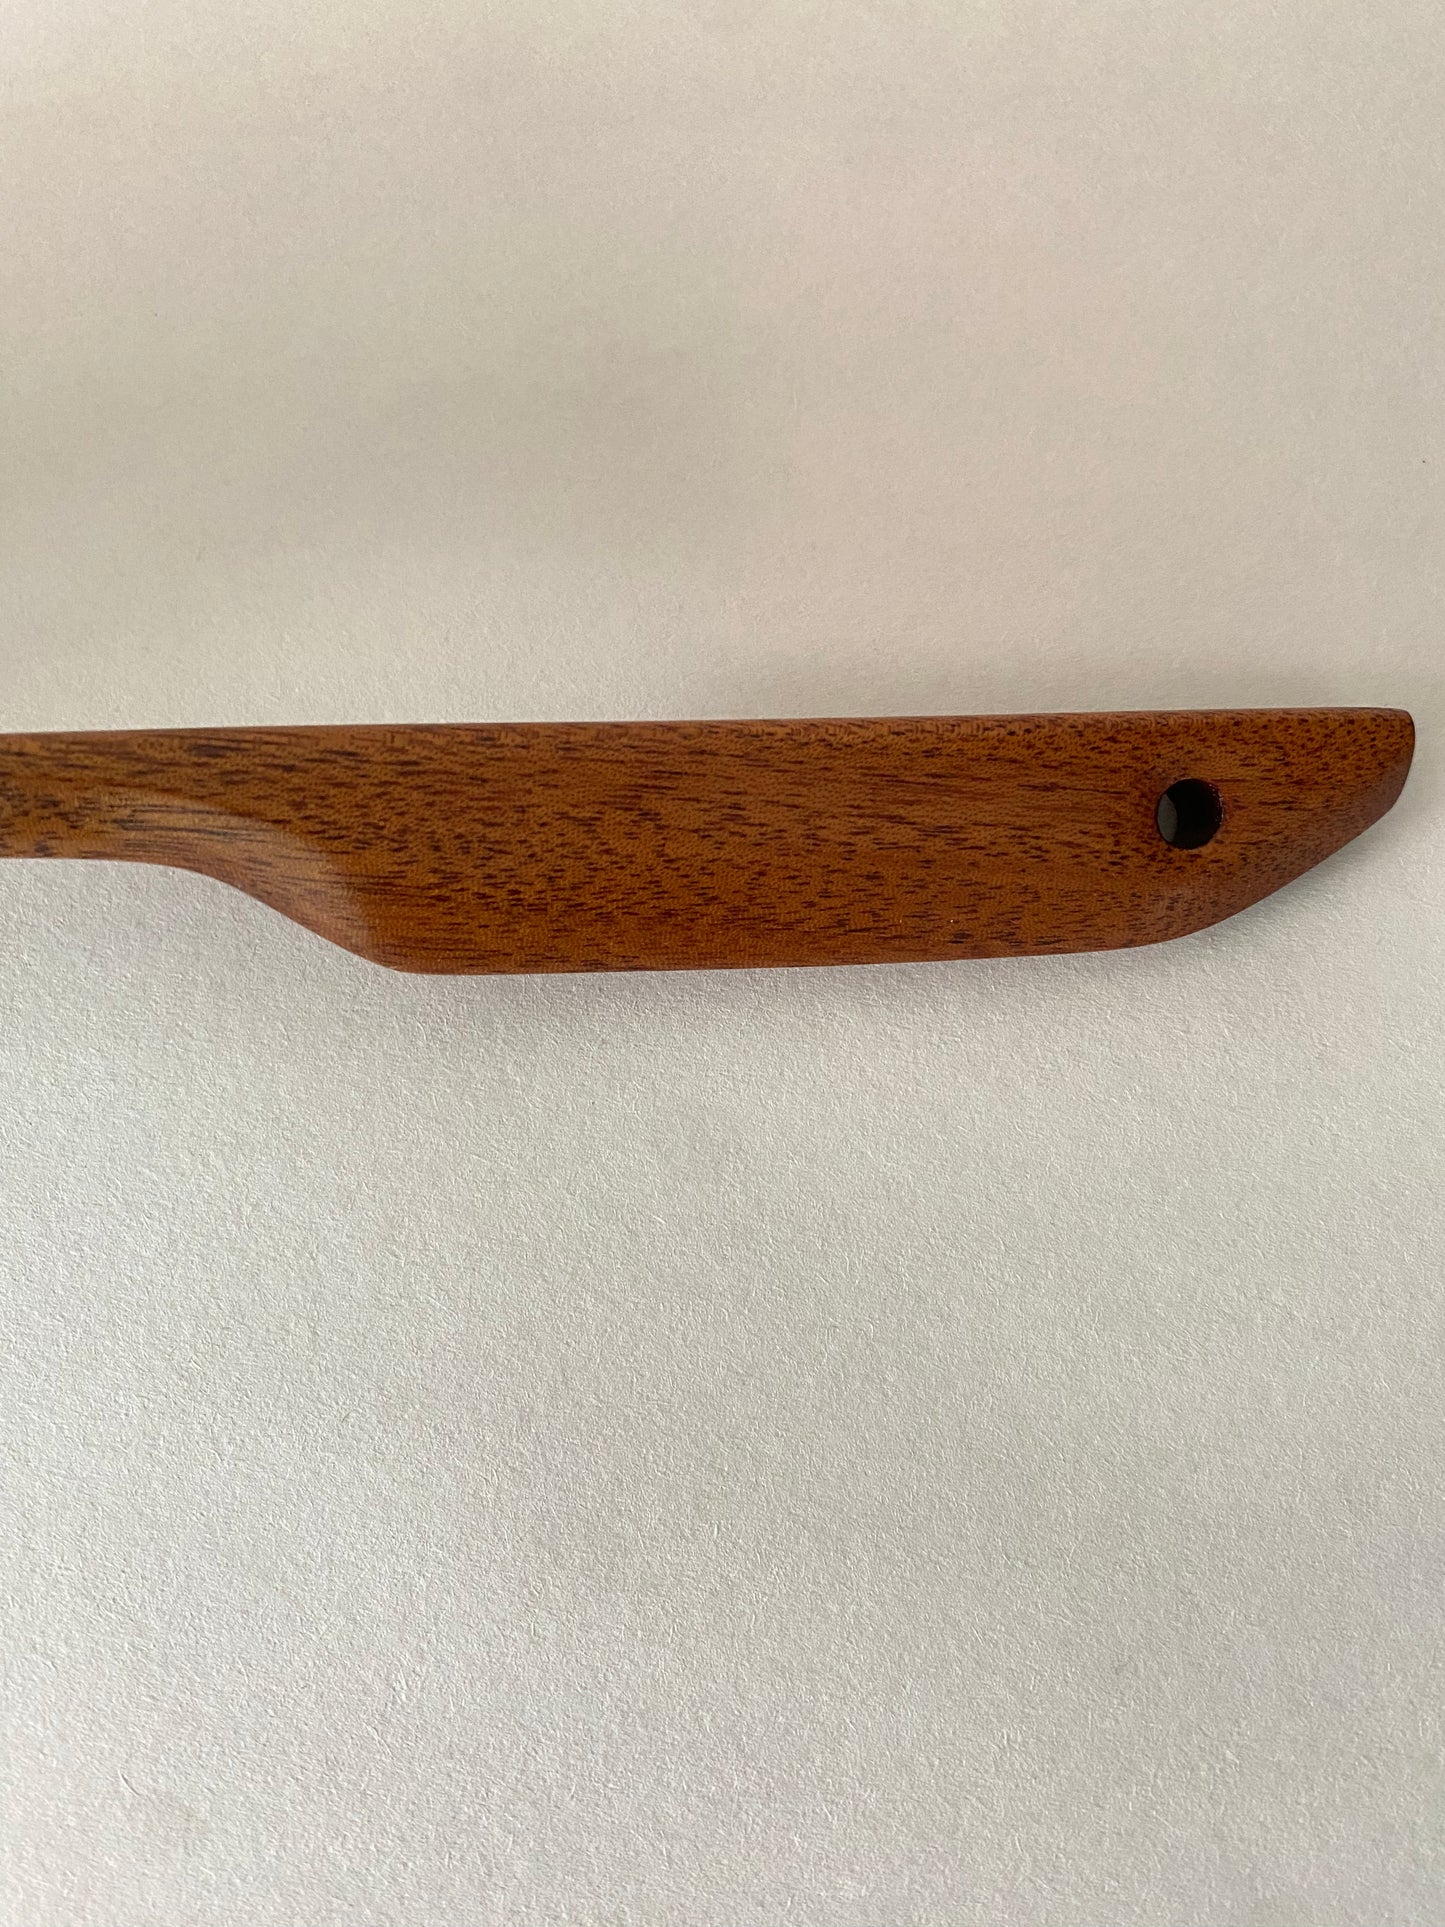 Mahogany Flipper - Hand-carved in Canada